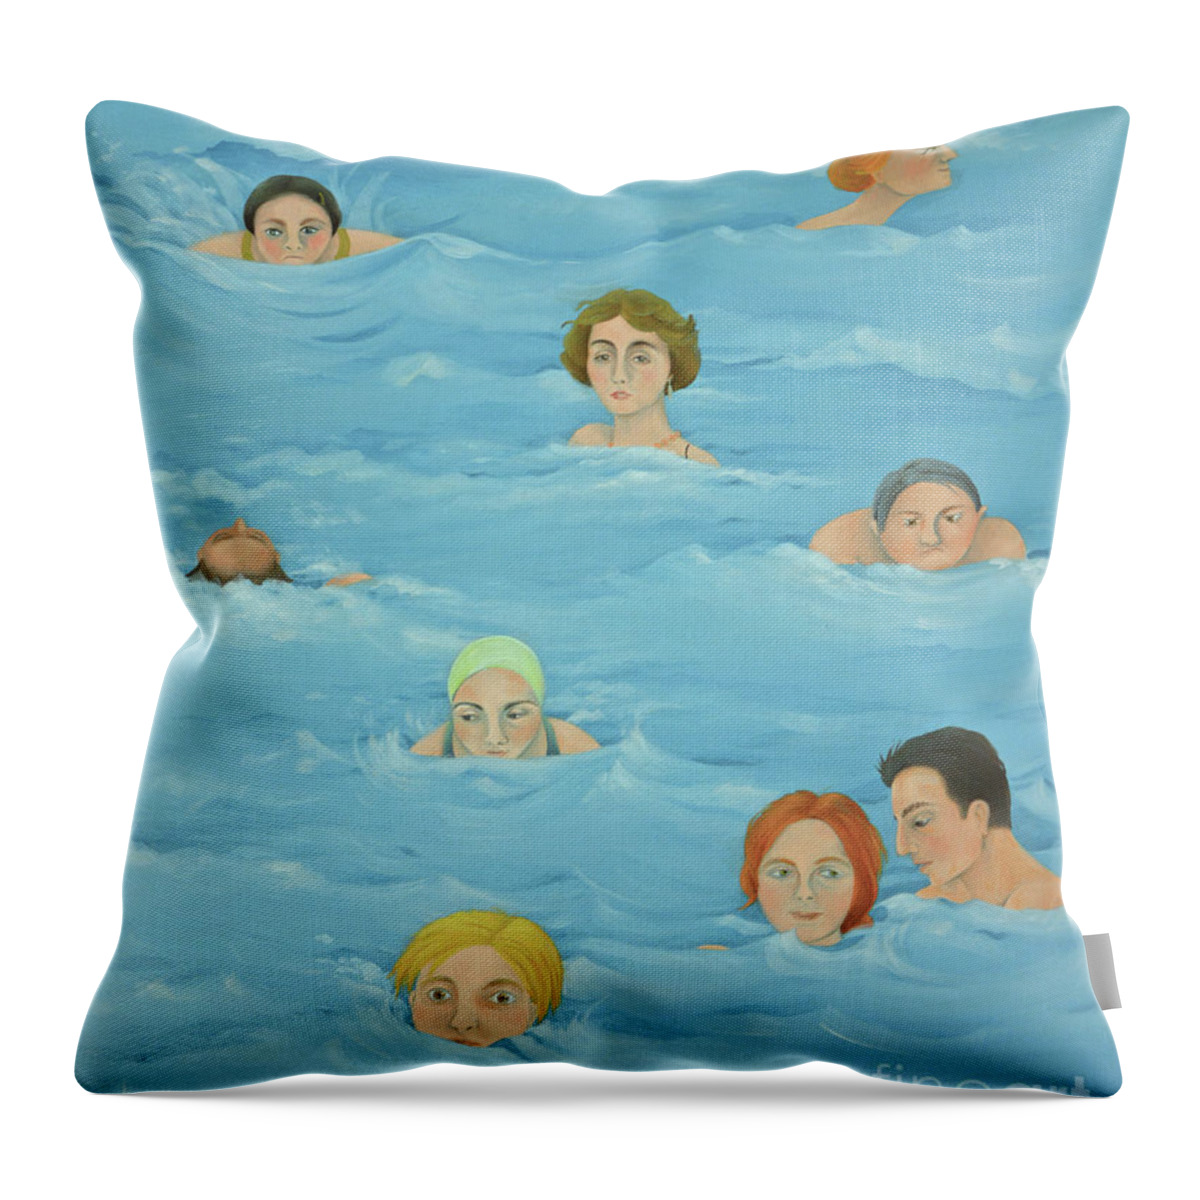 Art Throw Pillow featuring the painting In The Pool, 2016 by Magdolna Ban